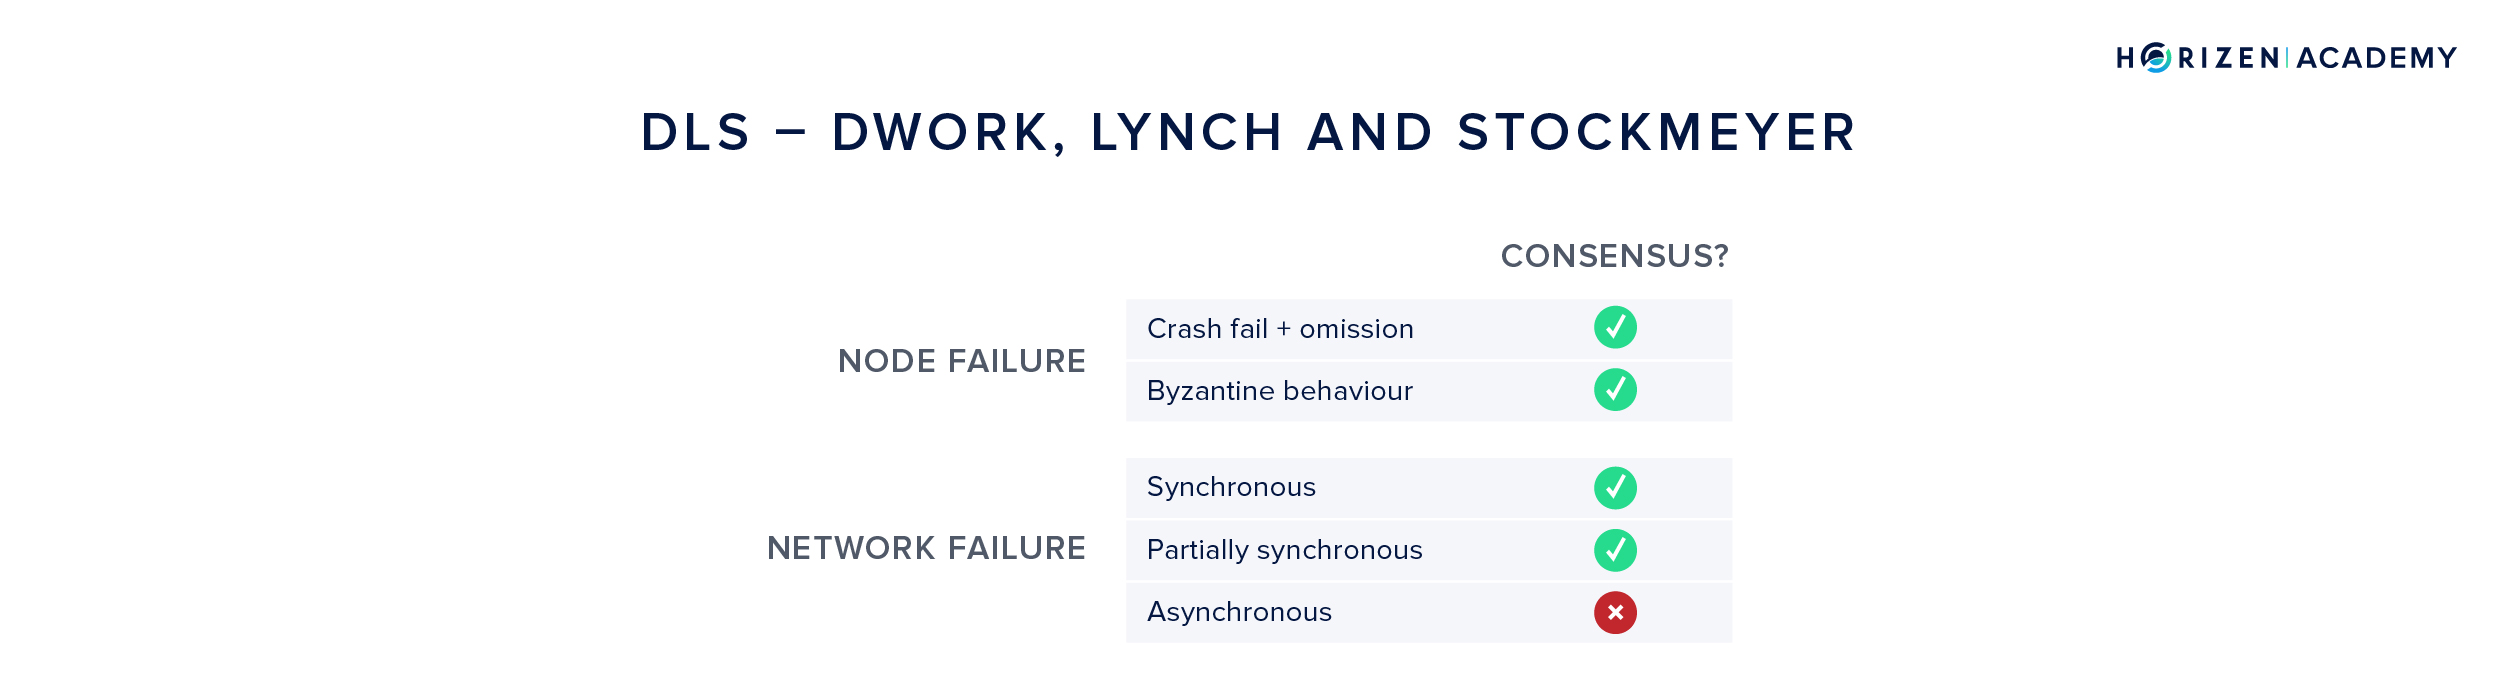 Dwork, Lynch and Stockmeyer Consensus